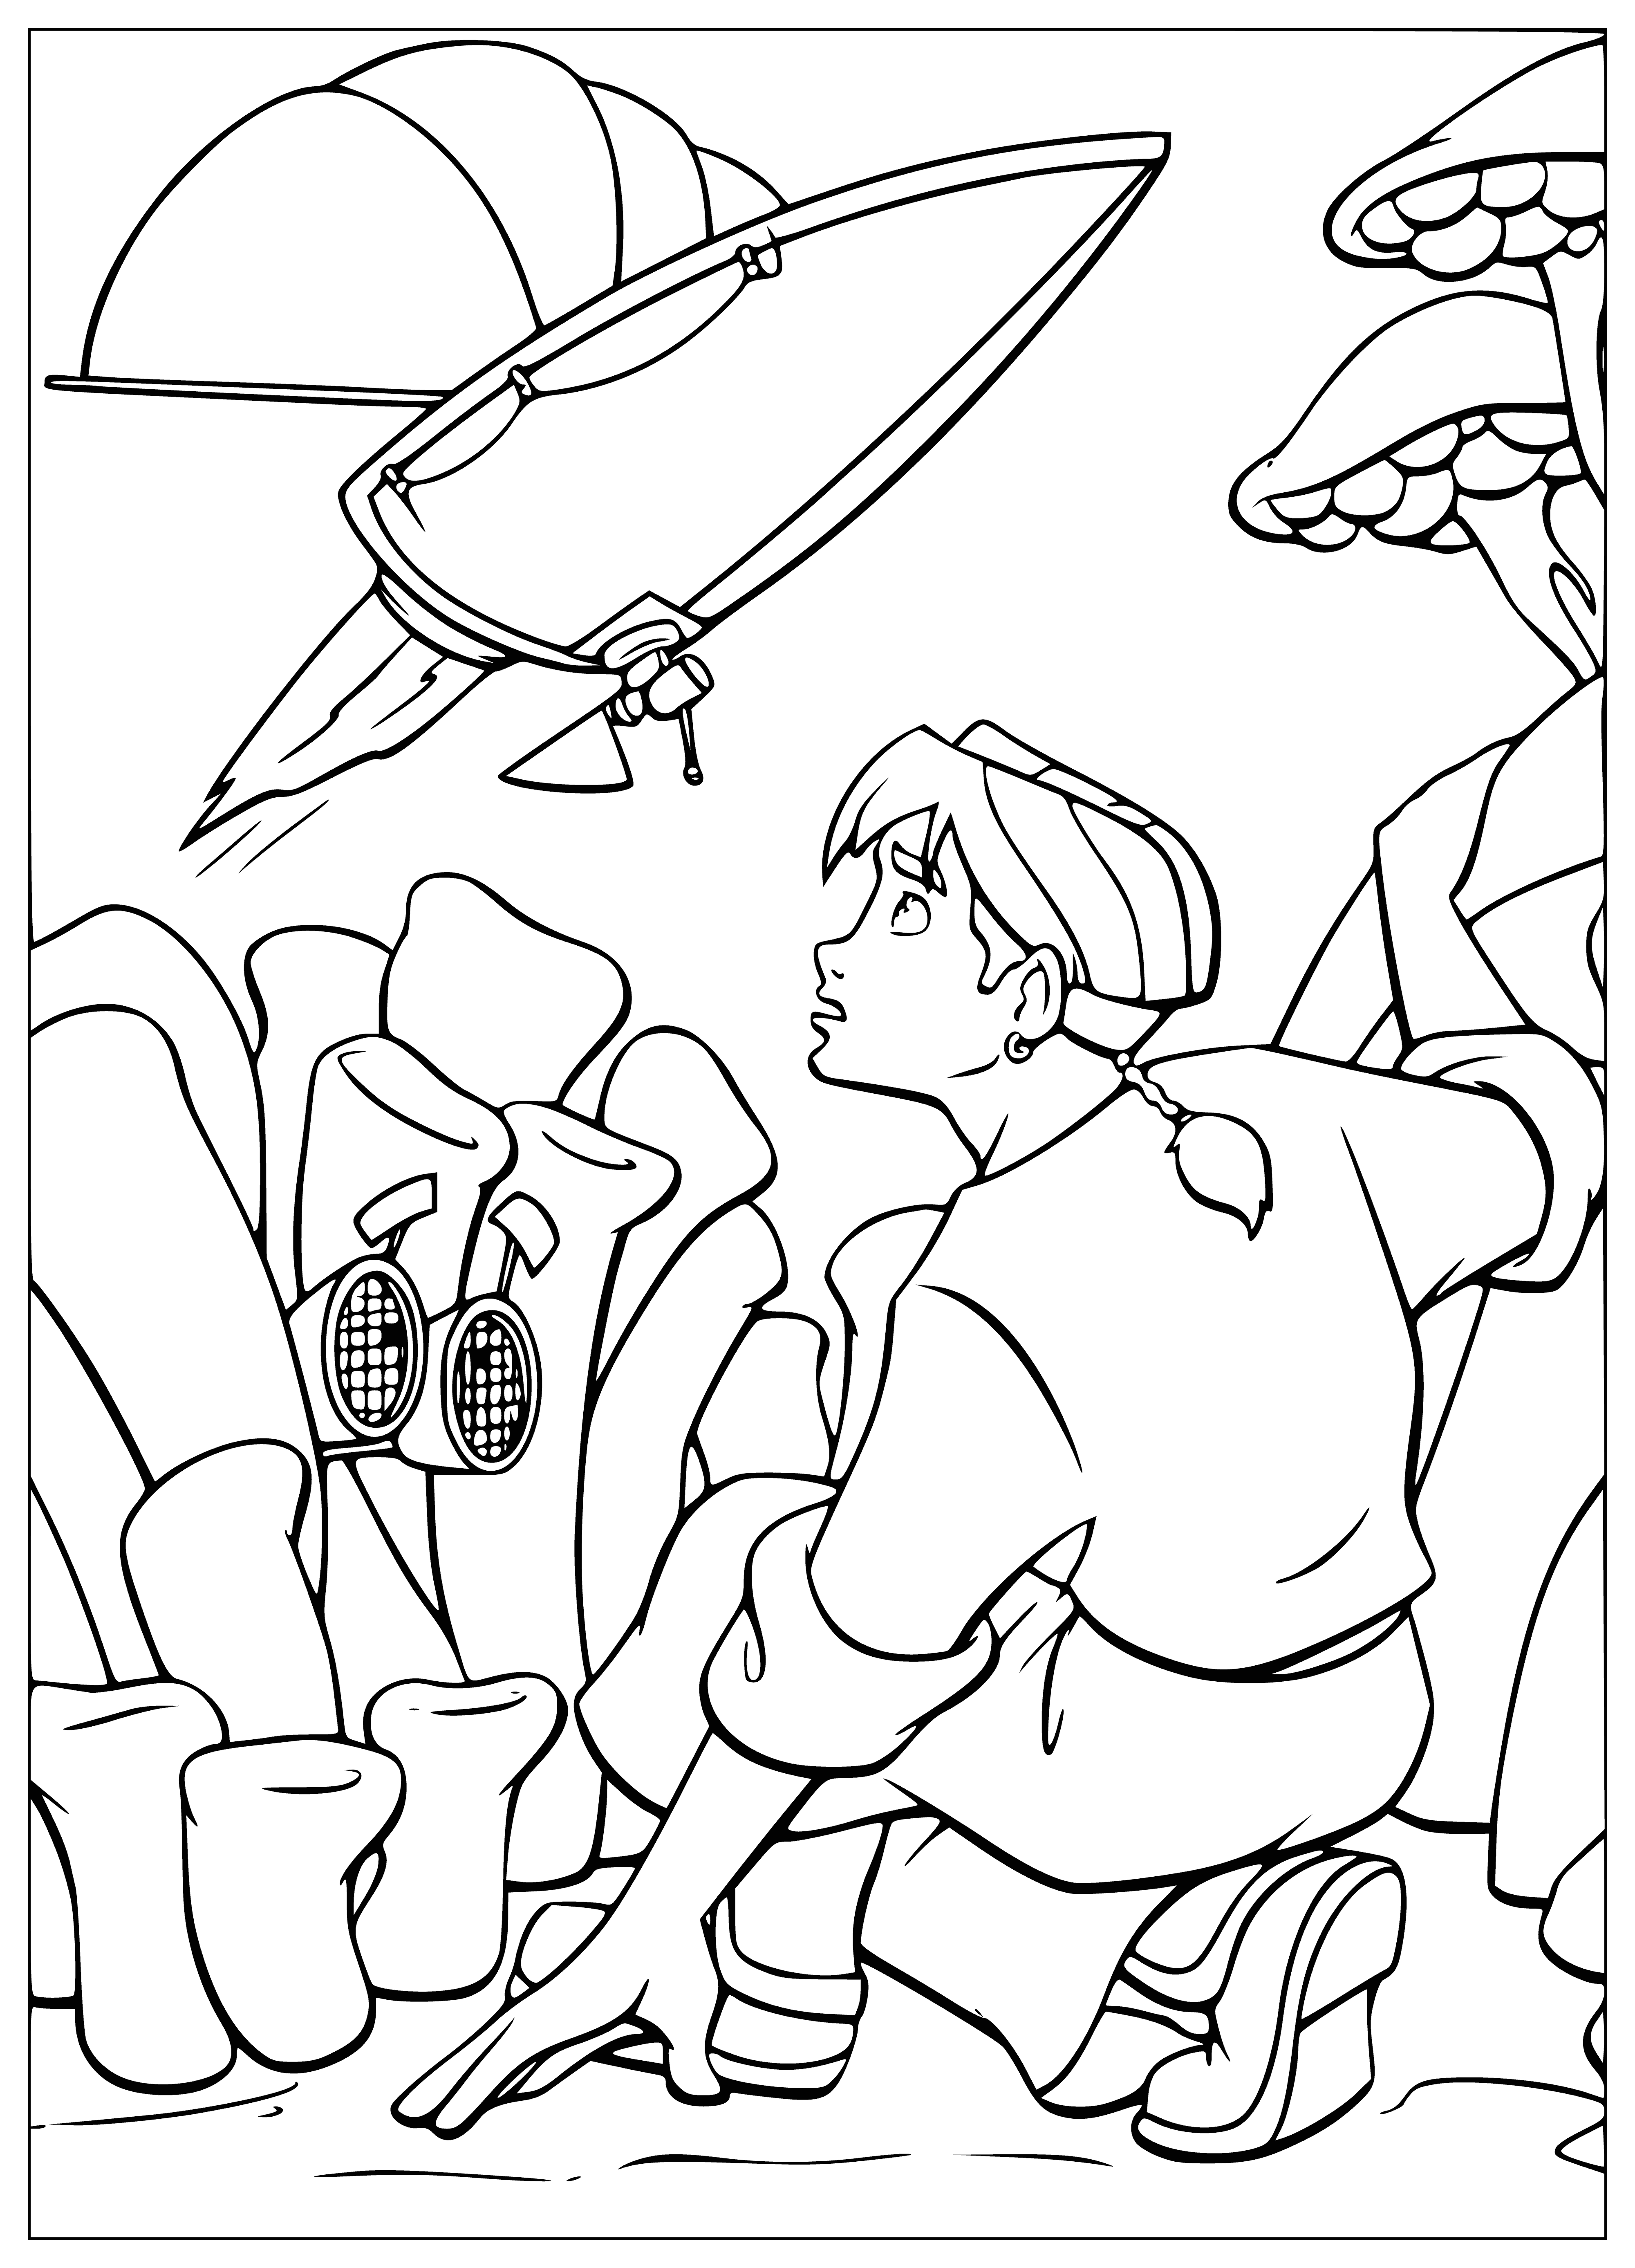 Jim finds a robot coloring page